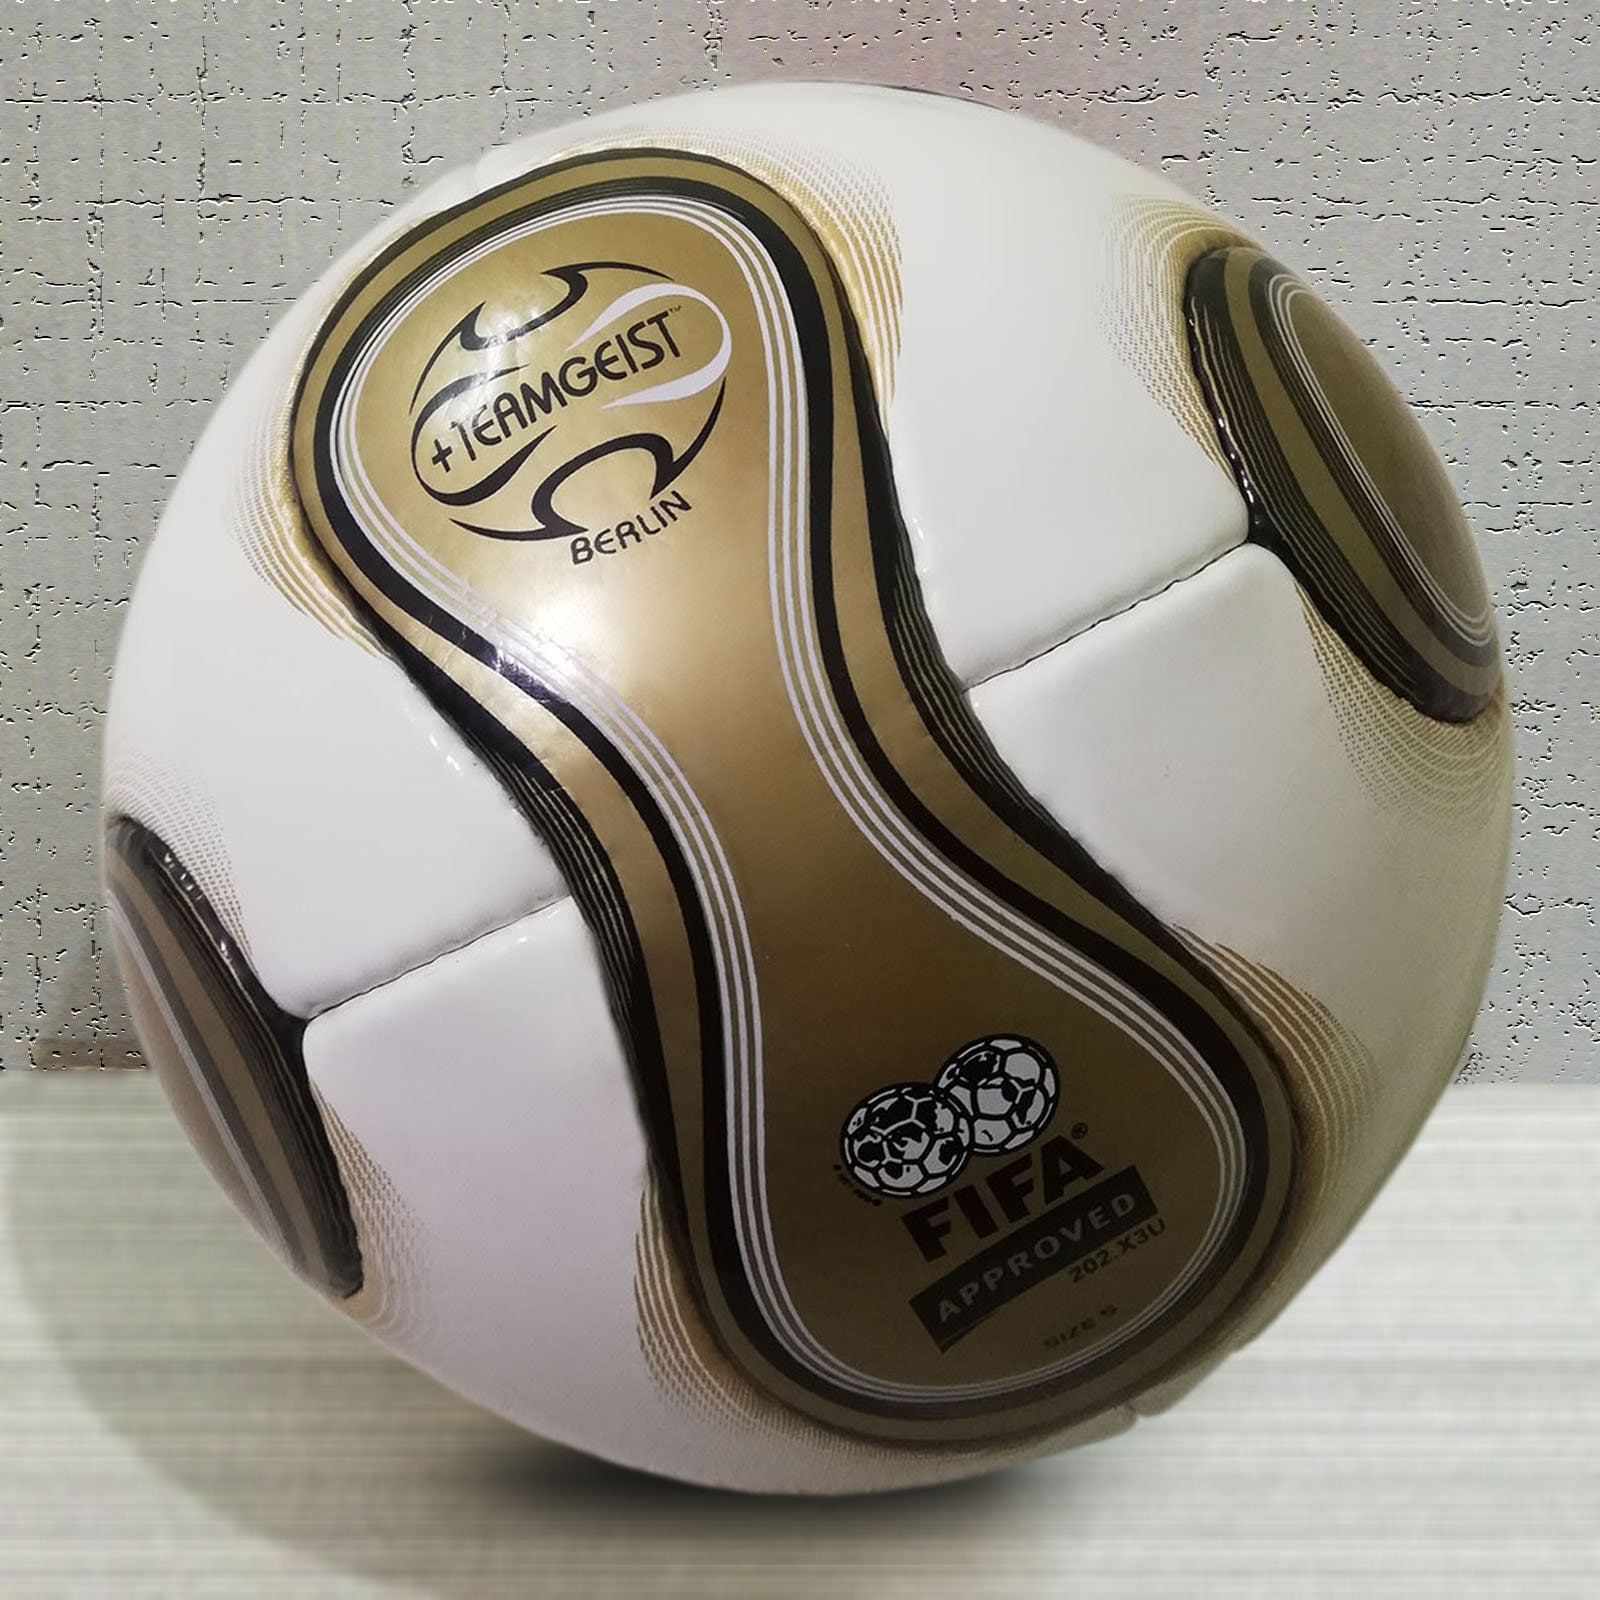 Final Teamgeist Official Match Ball World Cup Soccer 2006 - Etsy